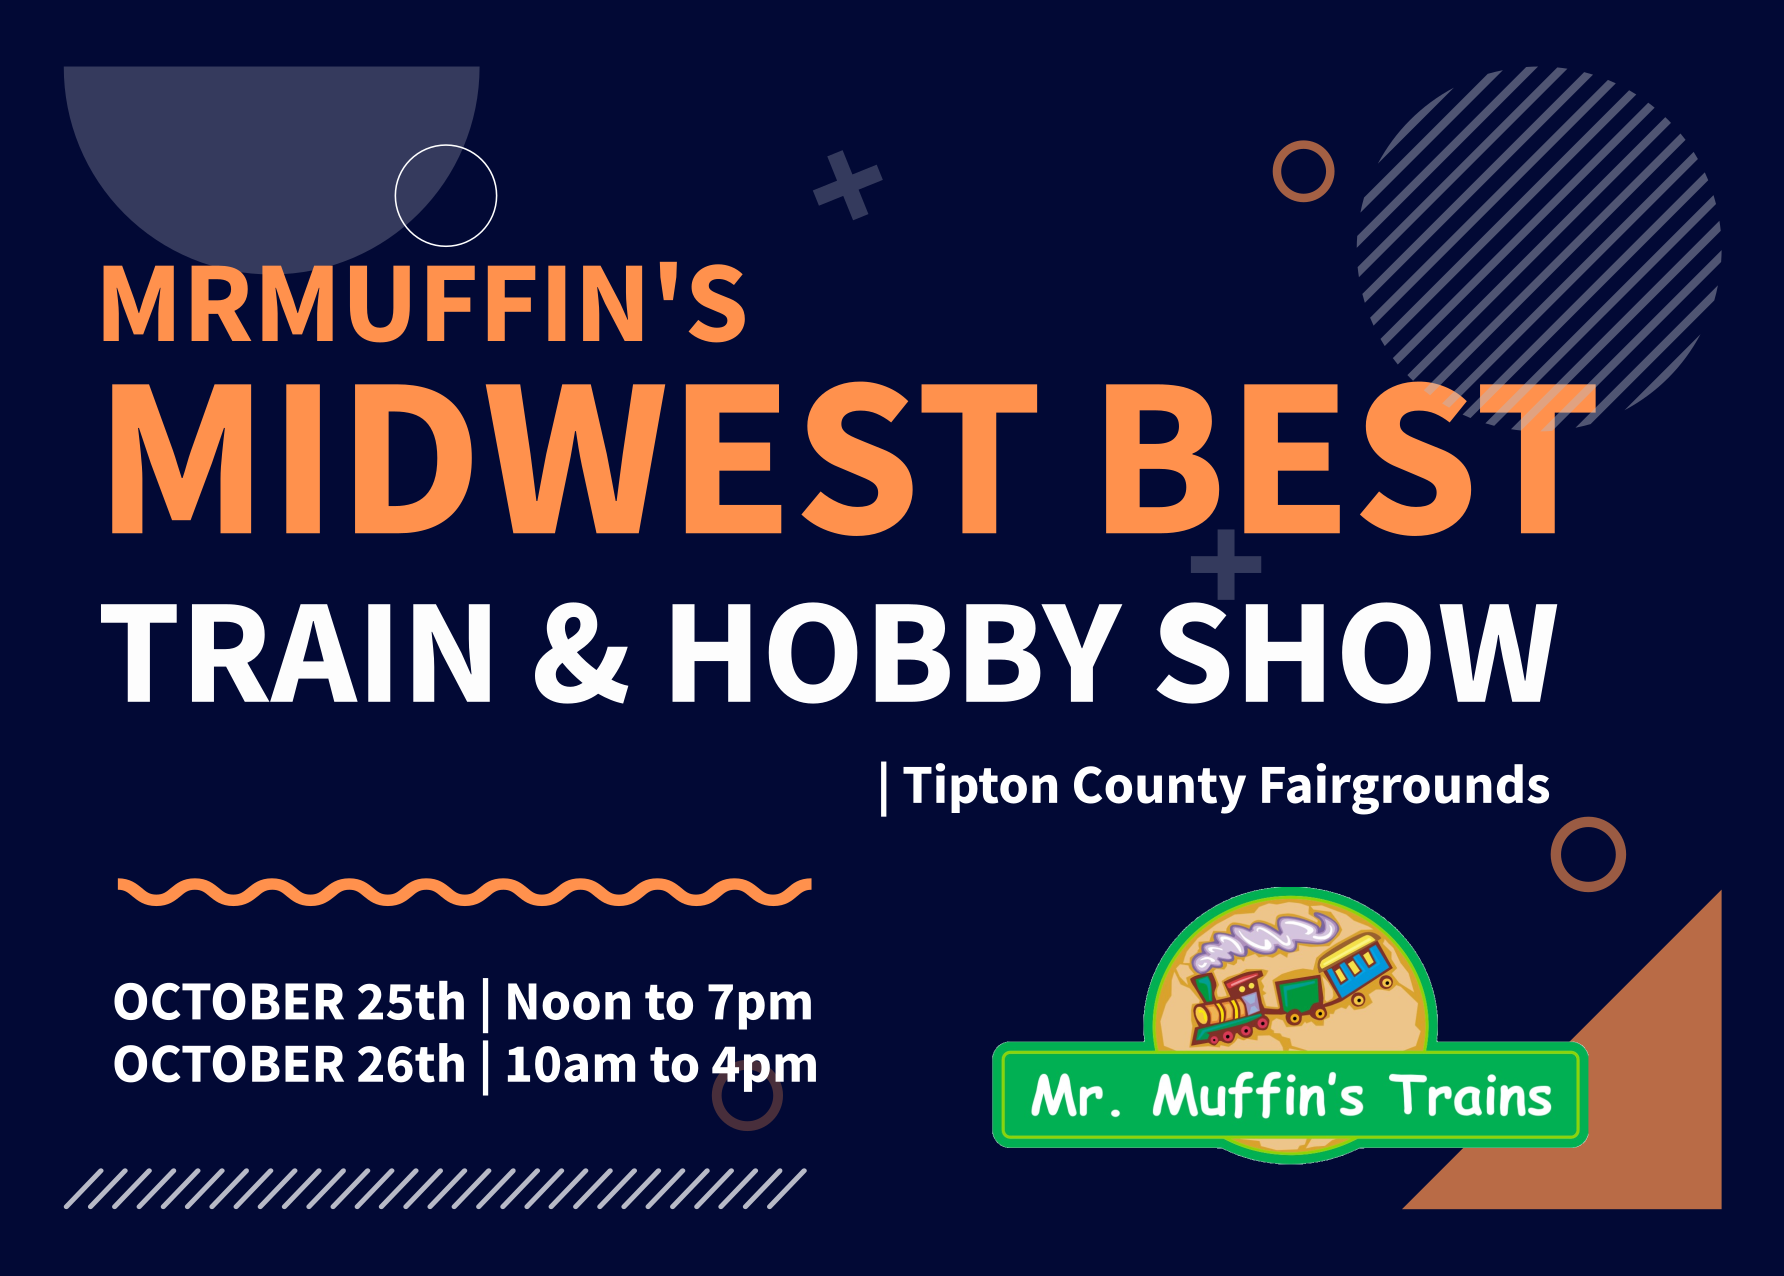 MrMuffin's Midwest Best Train and Hobby Show - Tables for Exhibitors